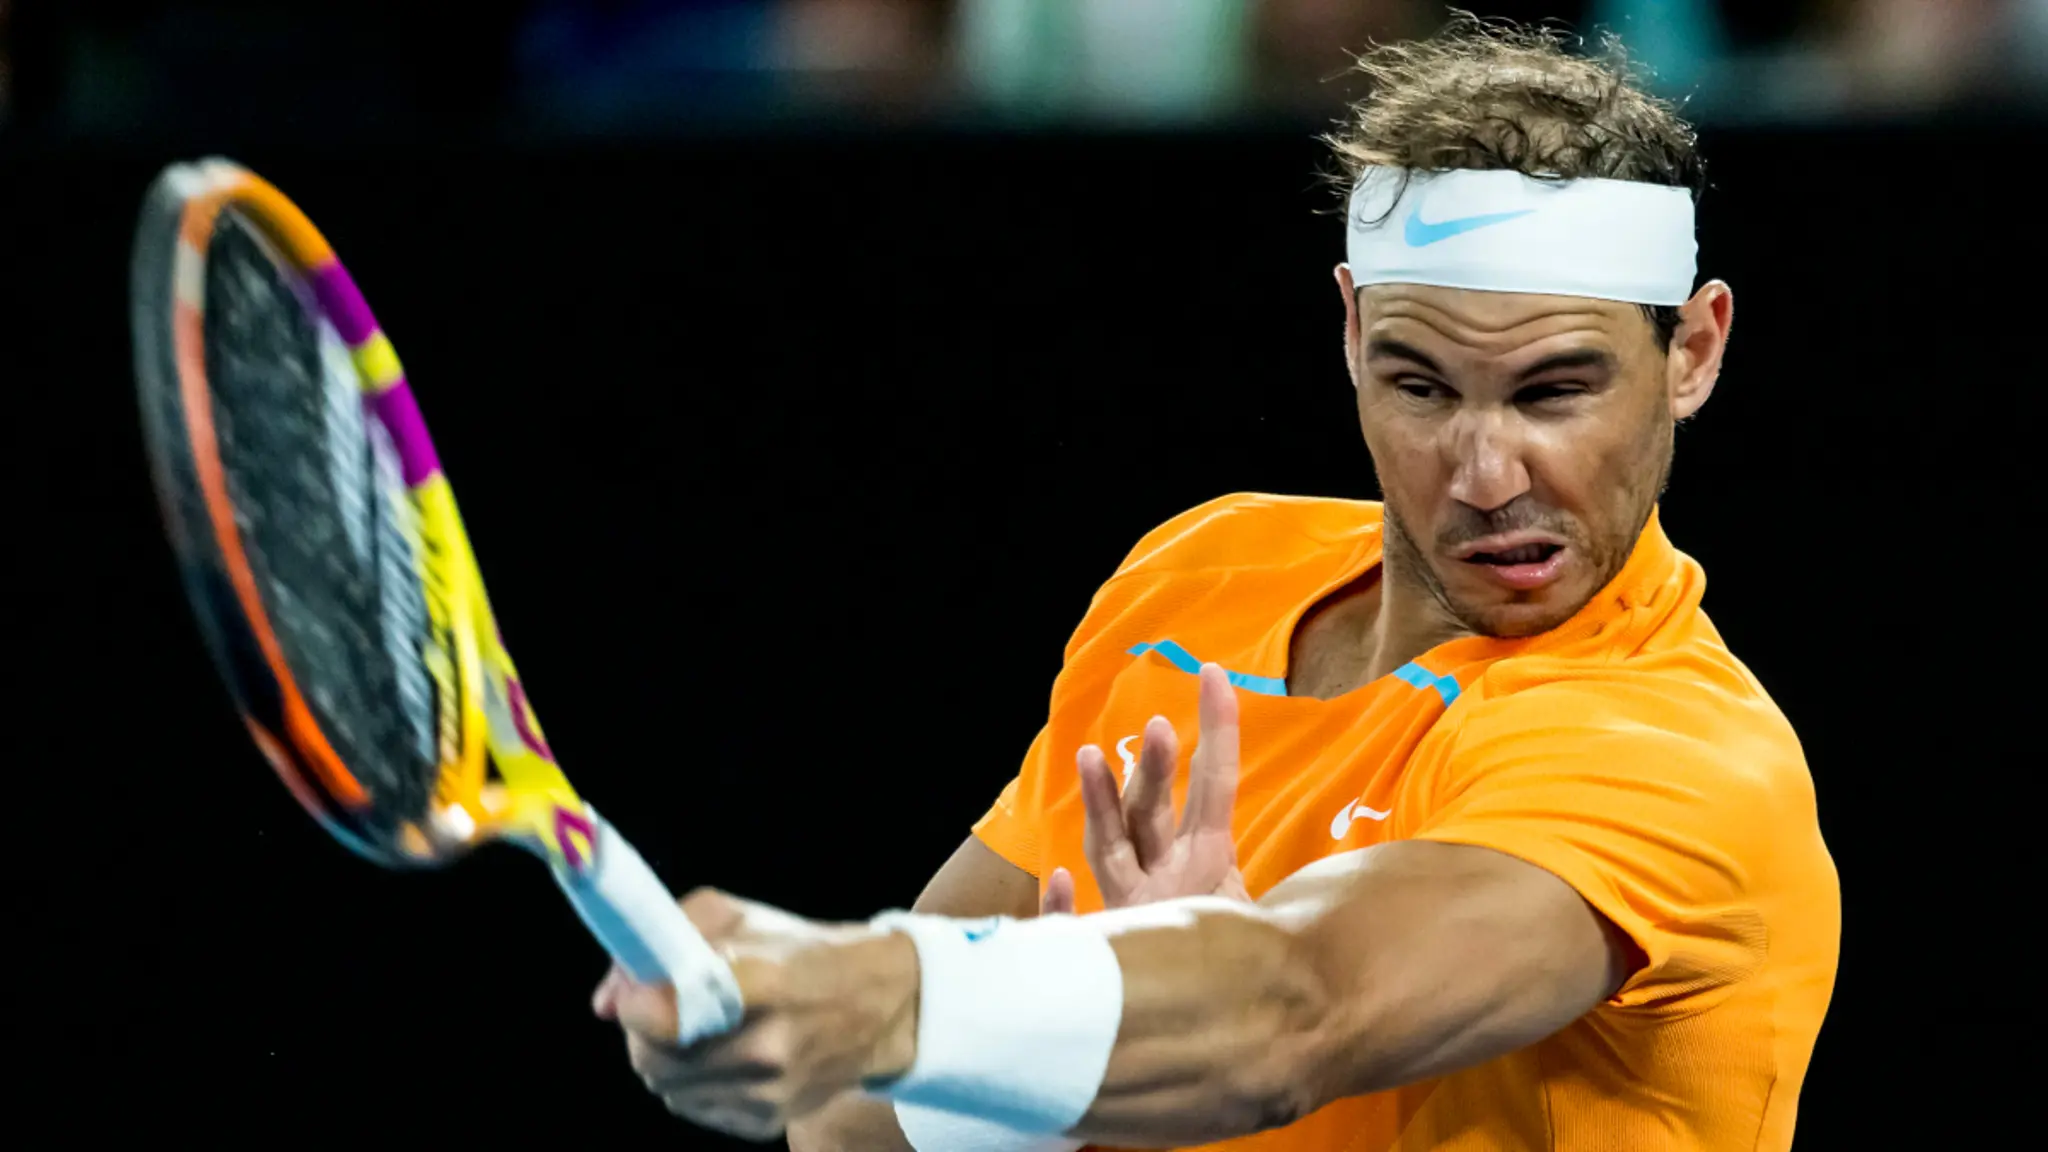 Can Rafael Nadal Battle Injury for French Open Run?